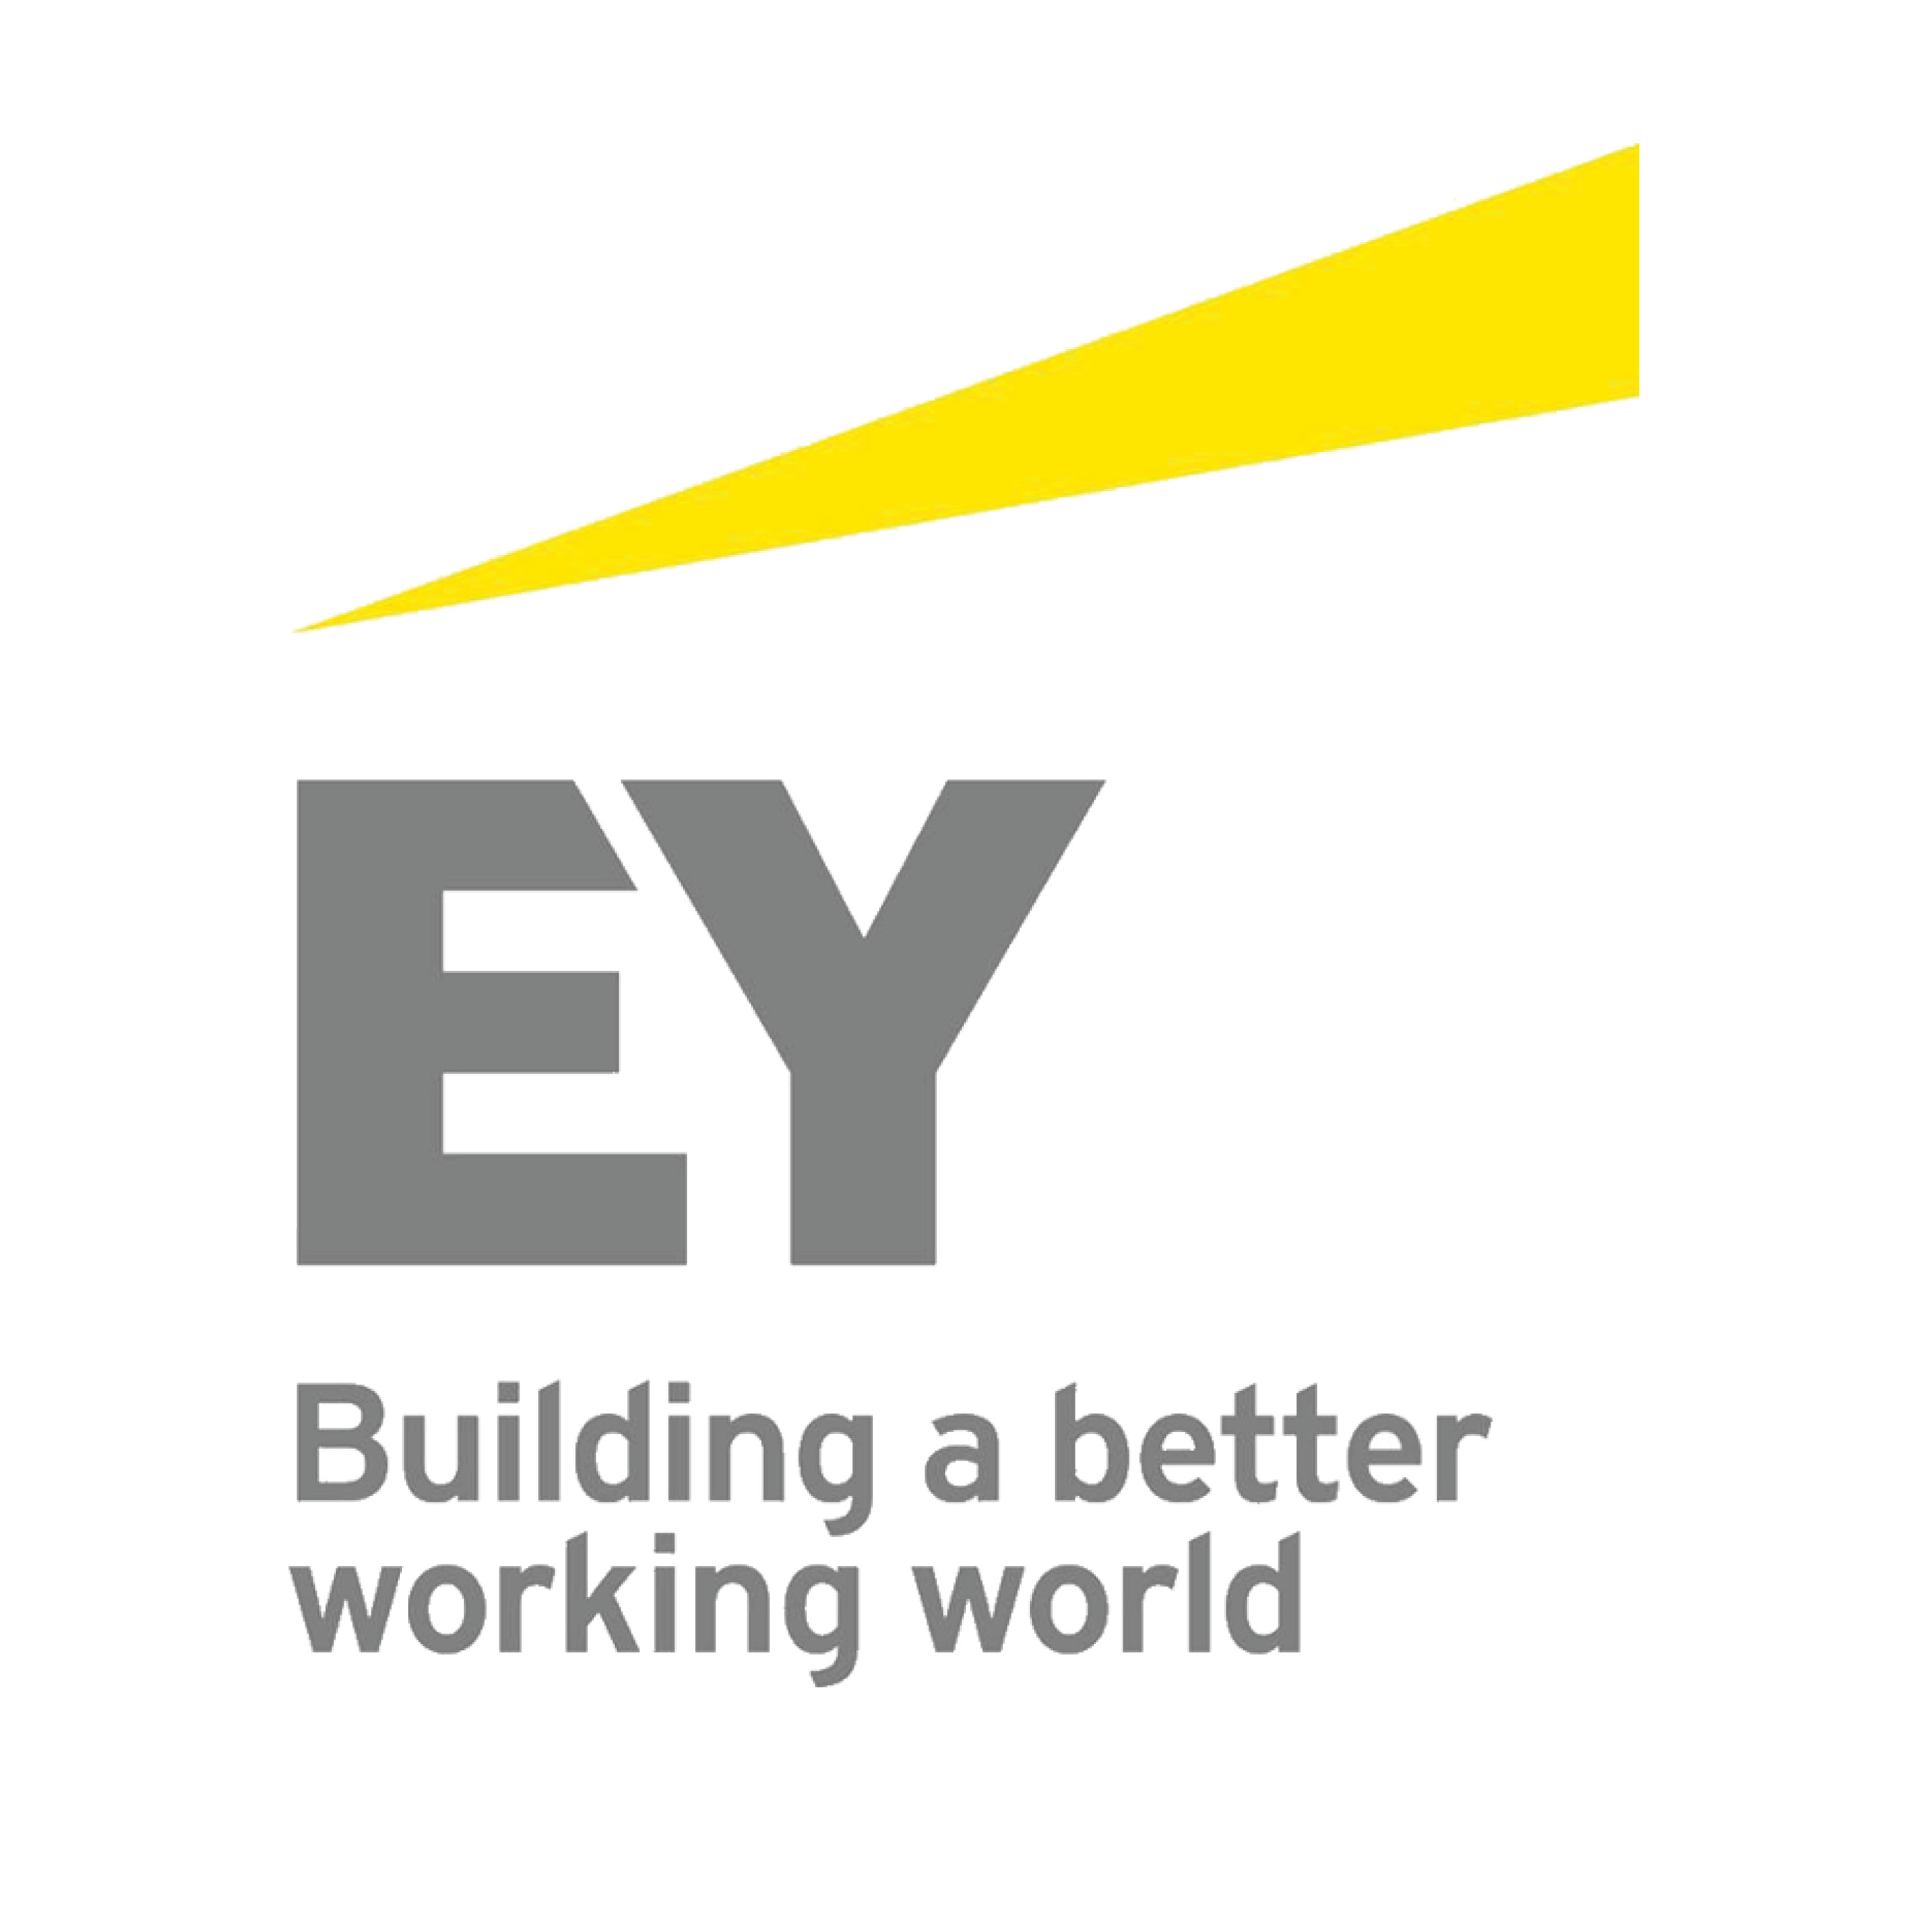 Ernst & Young Advisory Services Limited